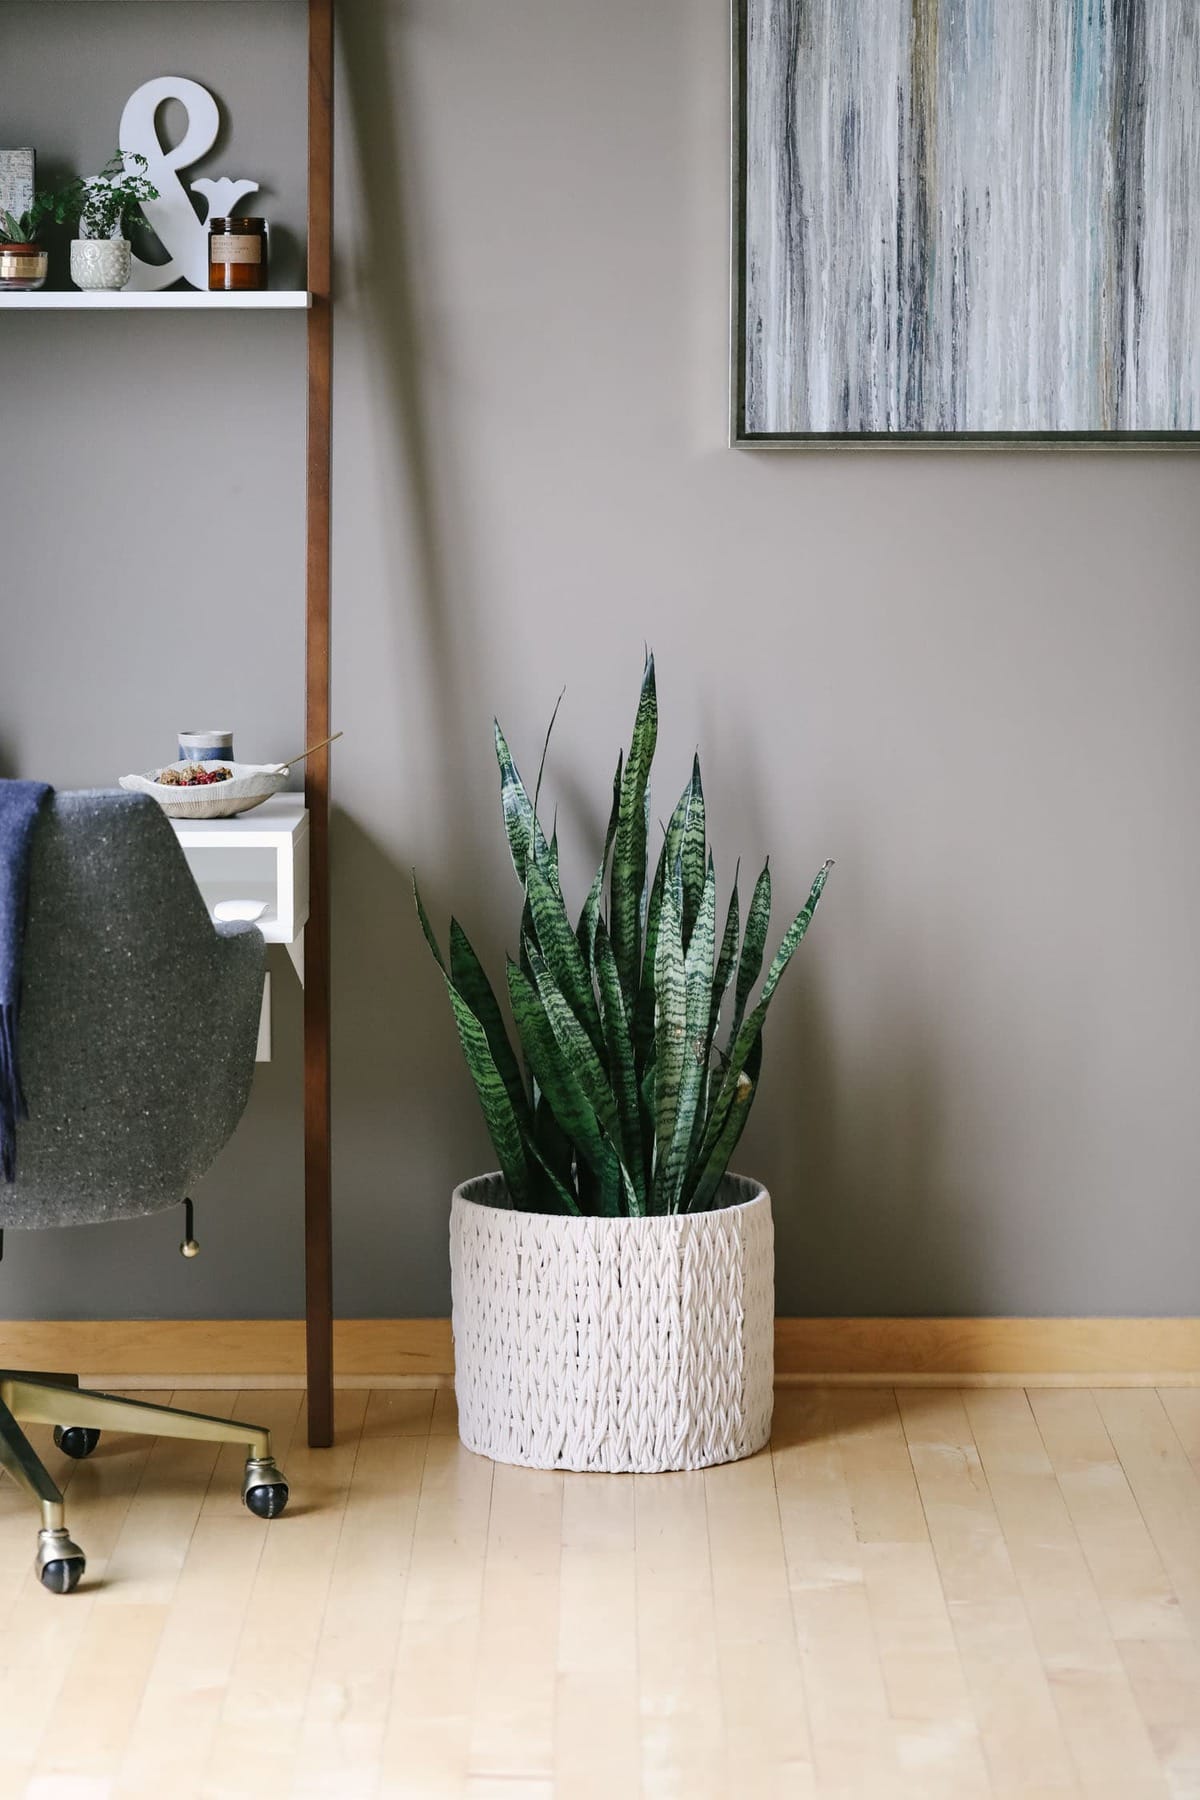 Plants make the world go round (literally) and I love them so much. Read all about the reasons why I love plants! In this post I also share which plants I have and how to take care of each one.